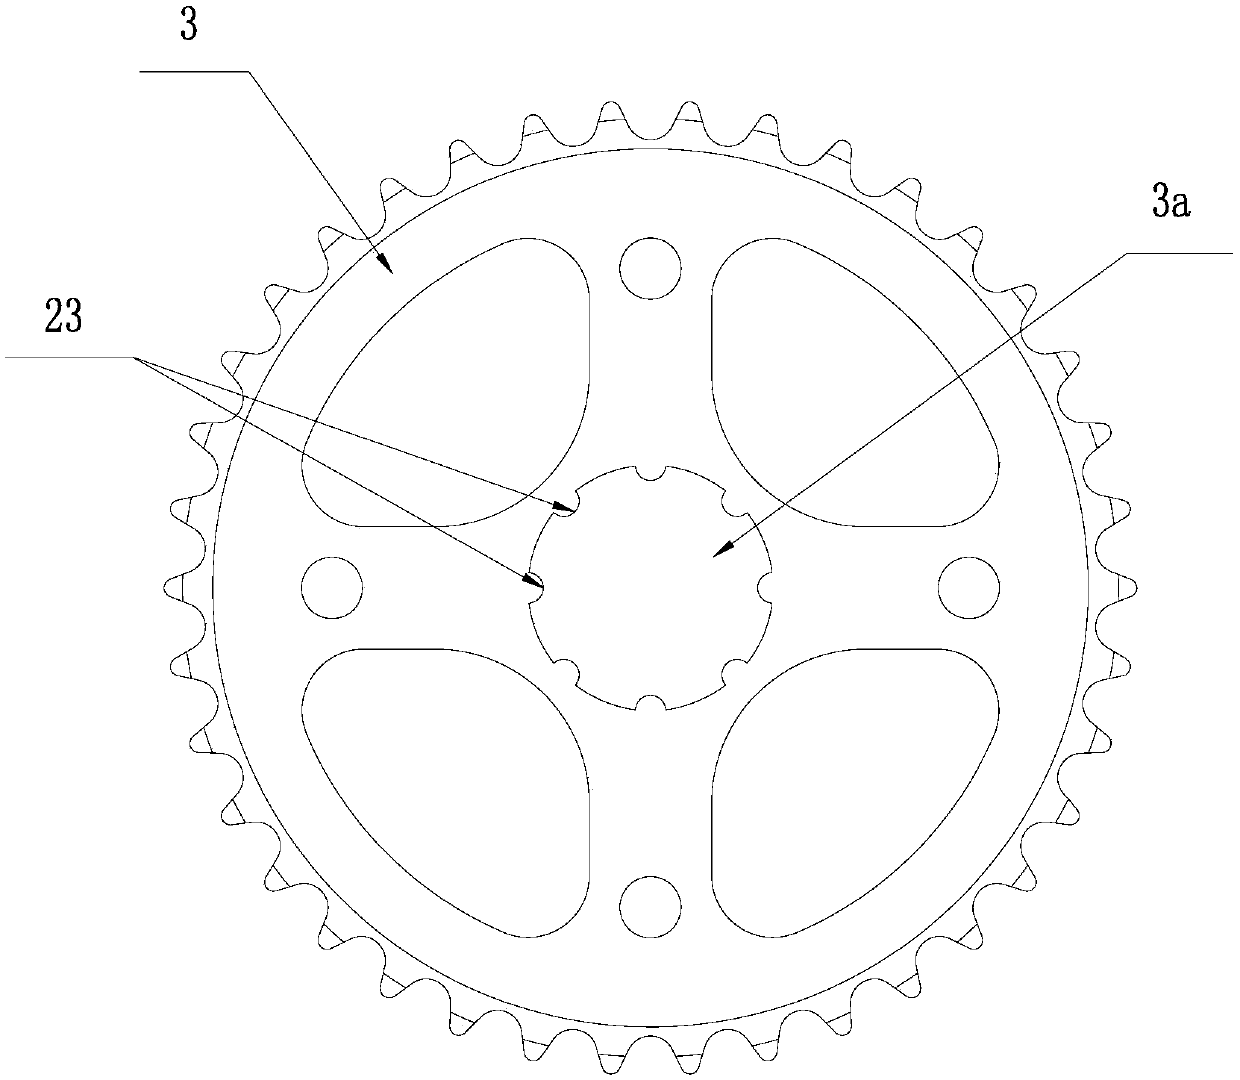 Primary-gear-gearing-down compact-type mid-motor